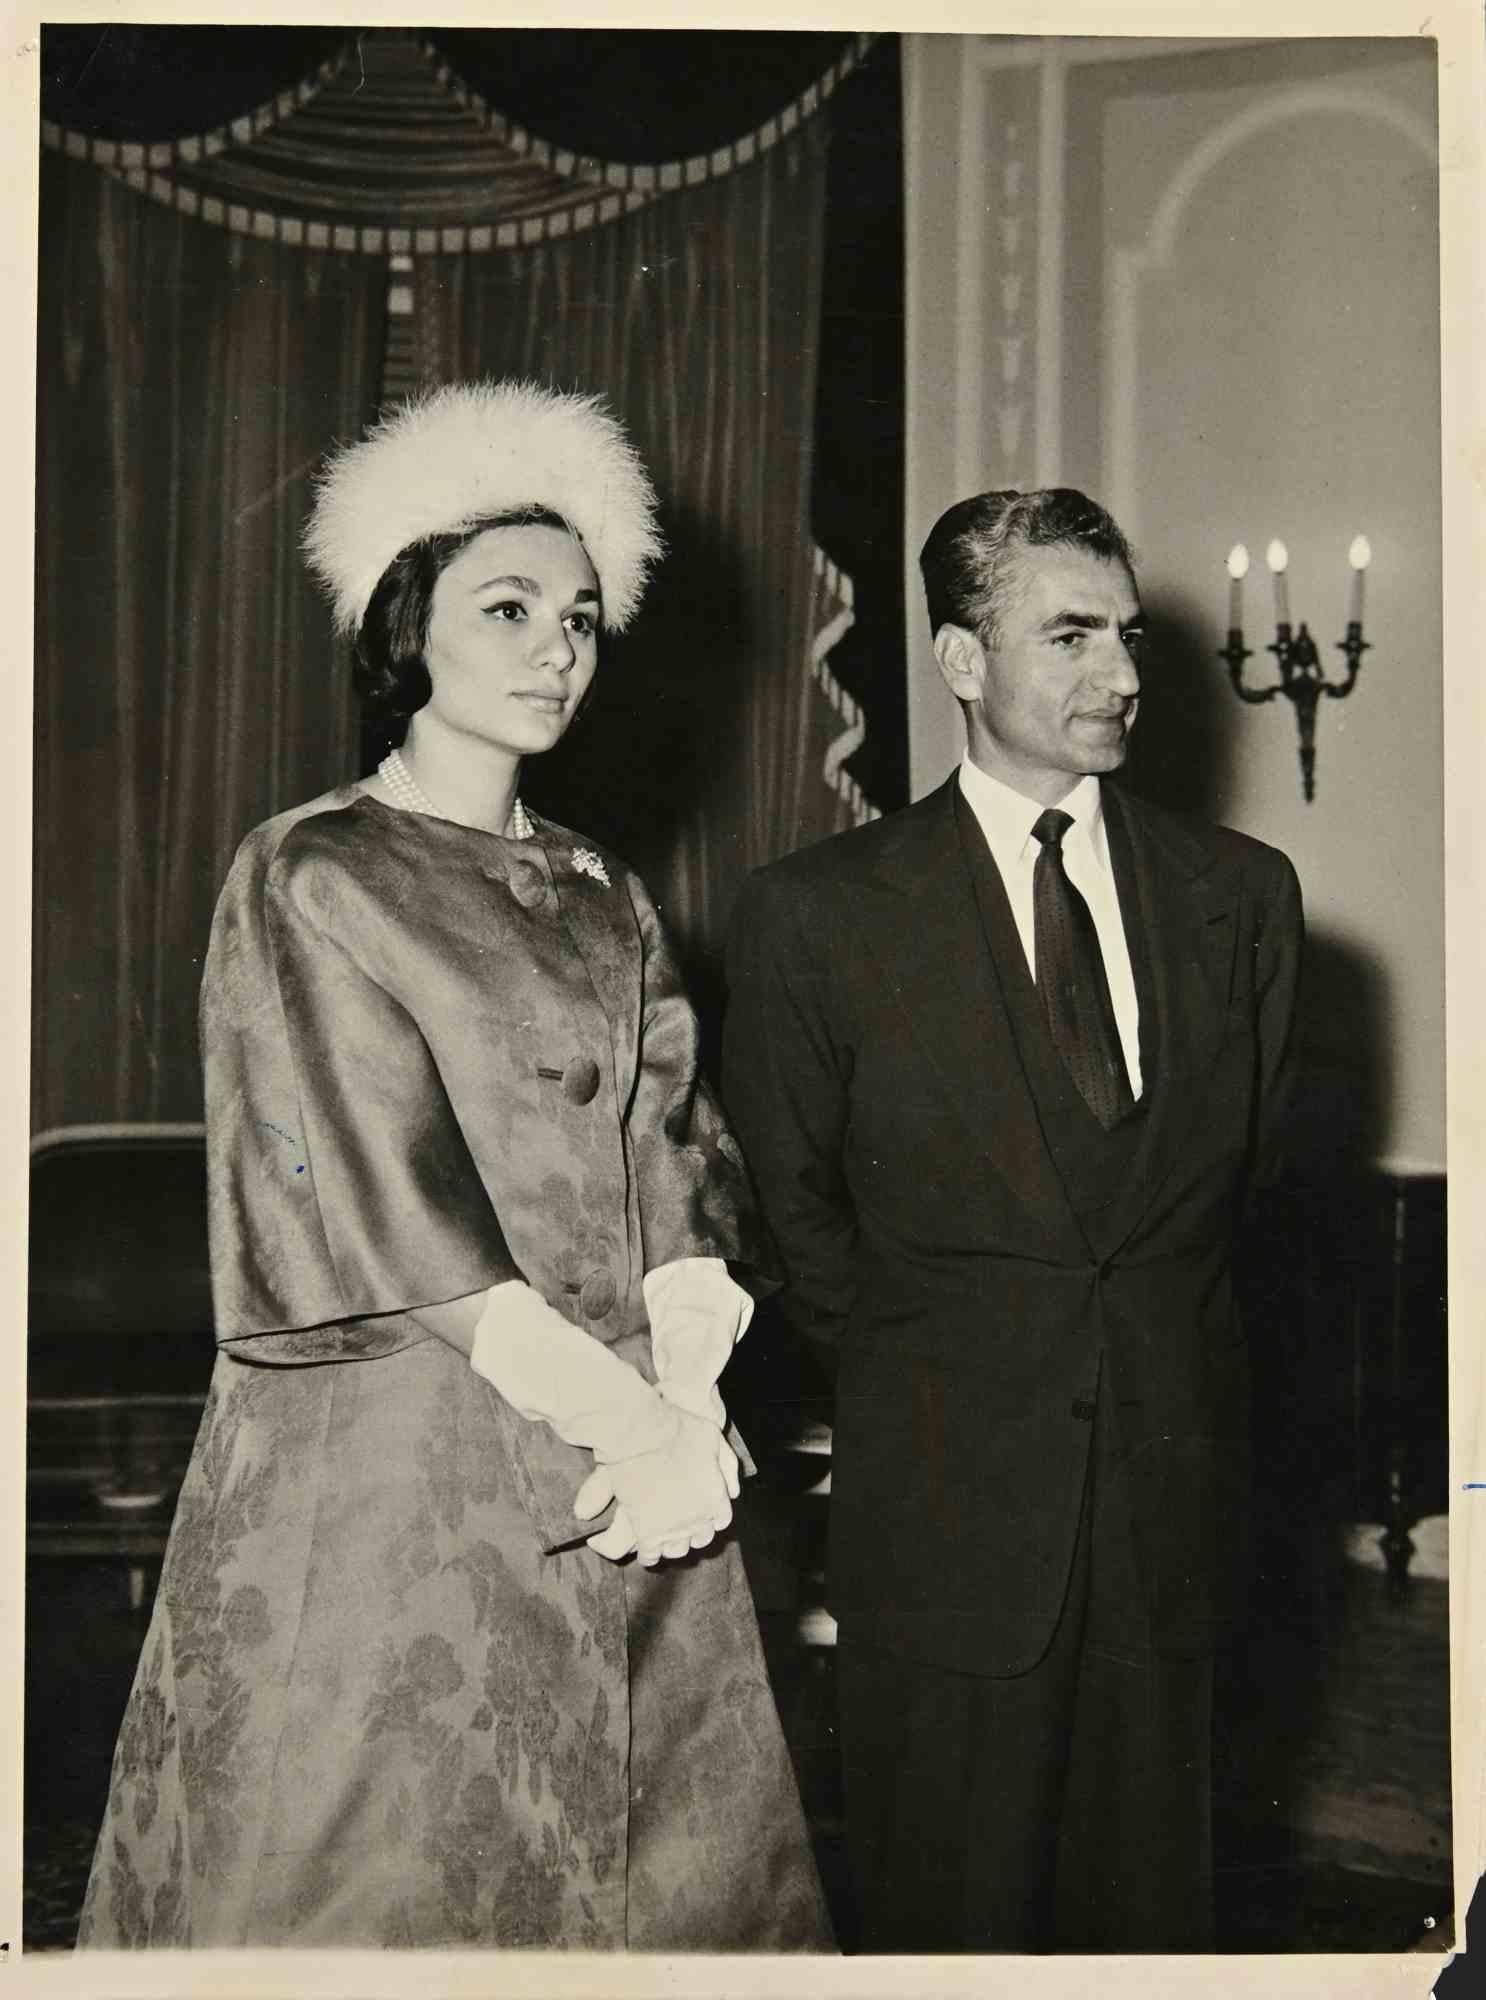 Unknown Figurative Photograph - Queen Farah Diba and Shah of Iran - Photograph - 1960s